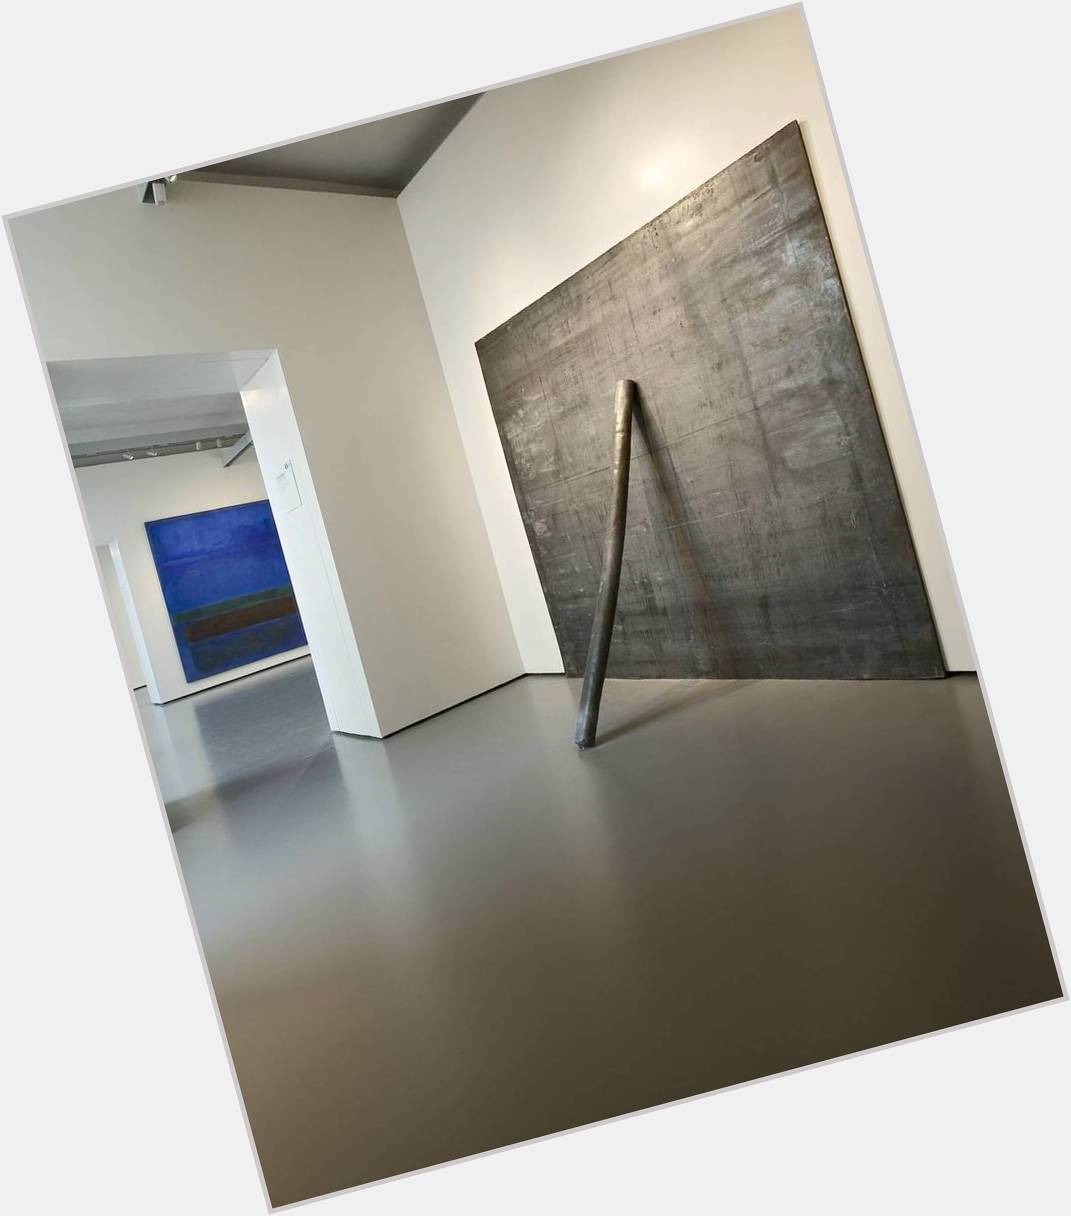  by \" Happy birthday Richard Serra! Floor Pole Prop (1969) was part of Where Are We Goin 